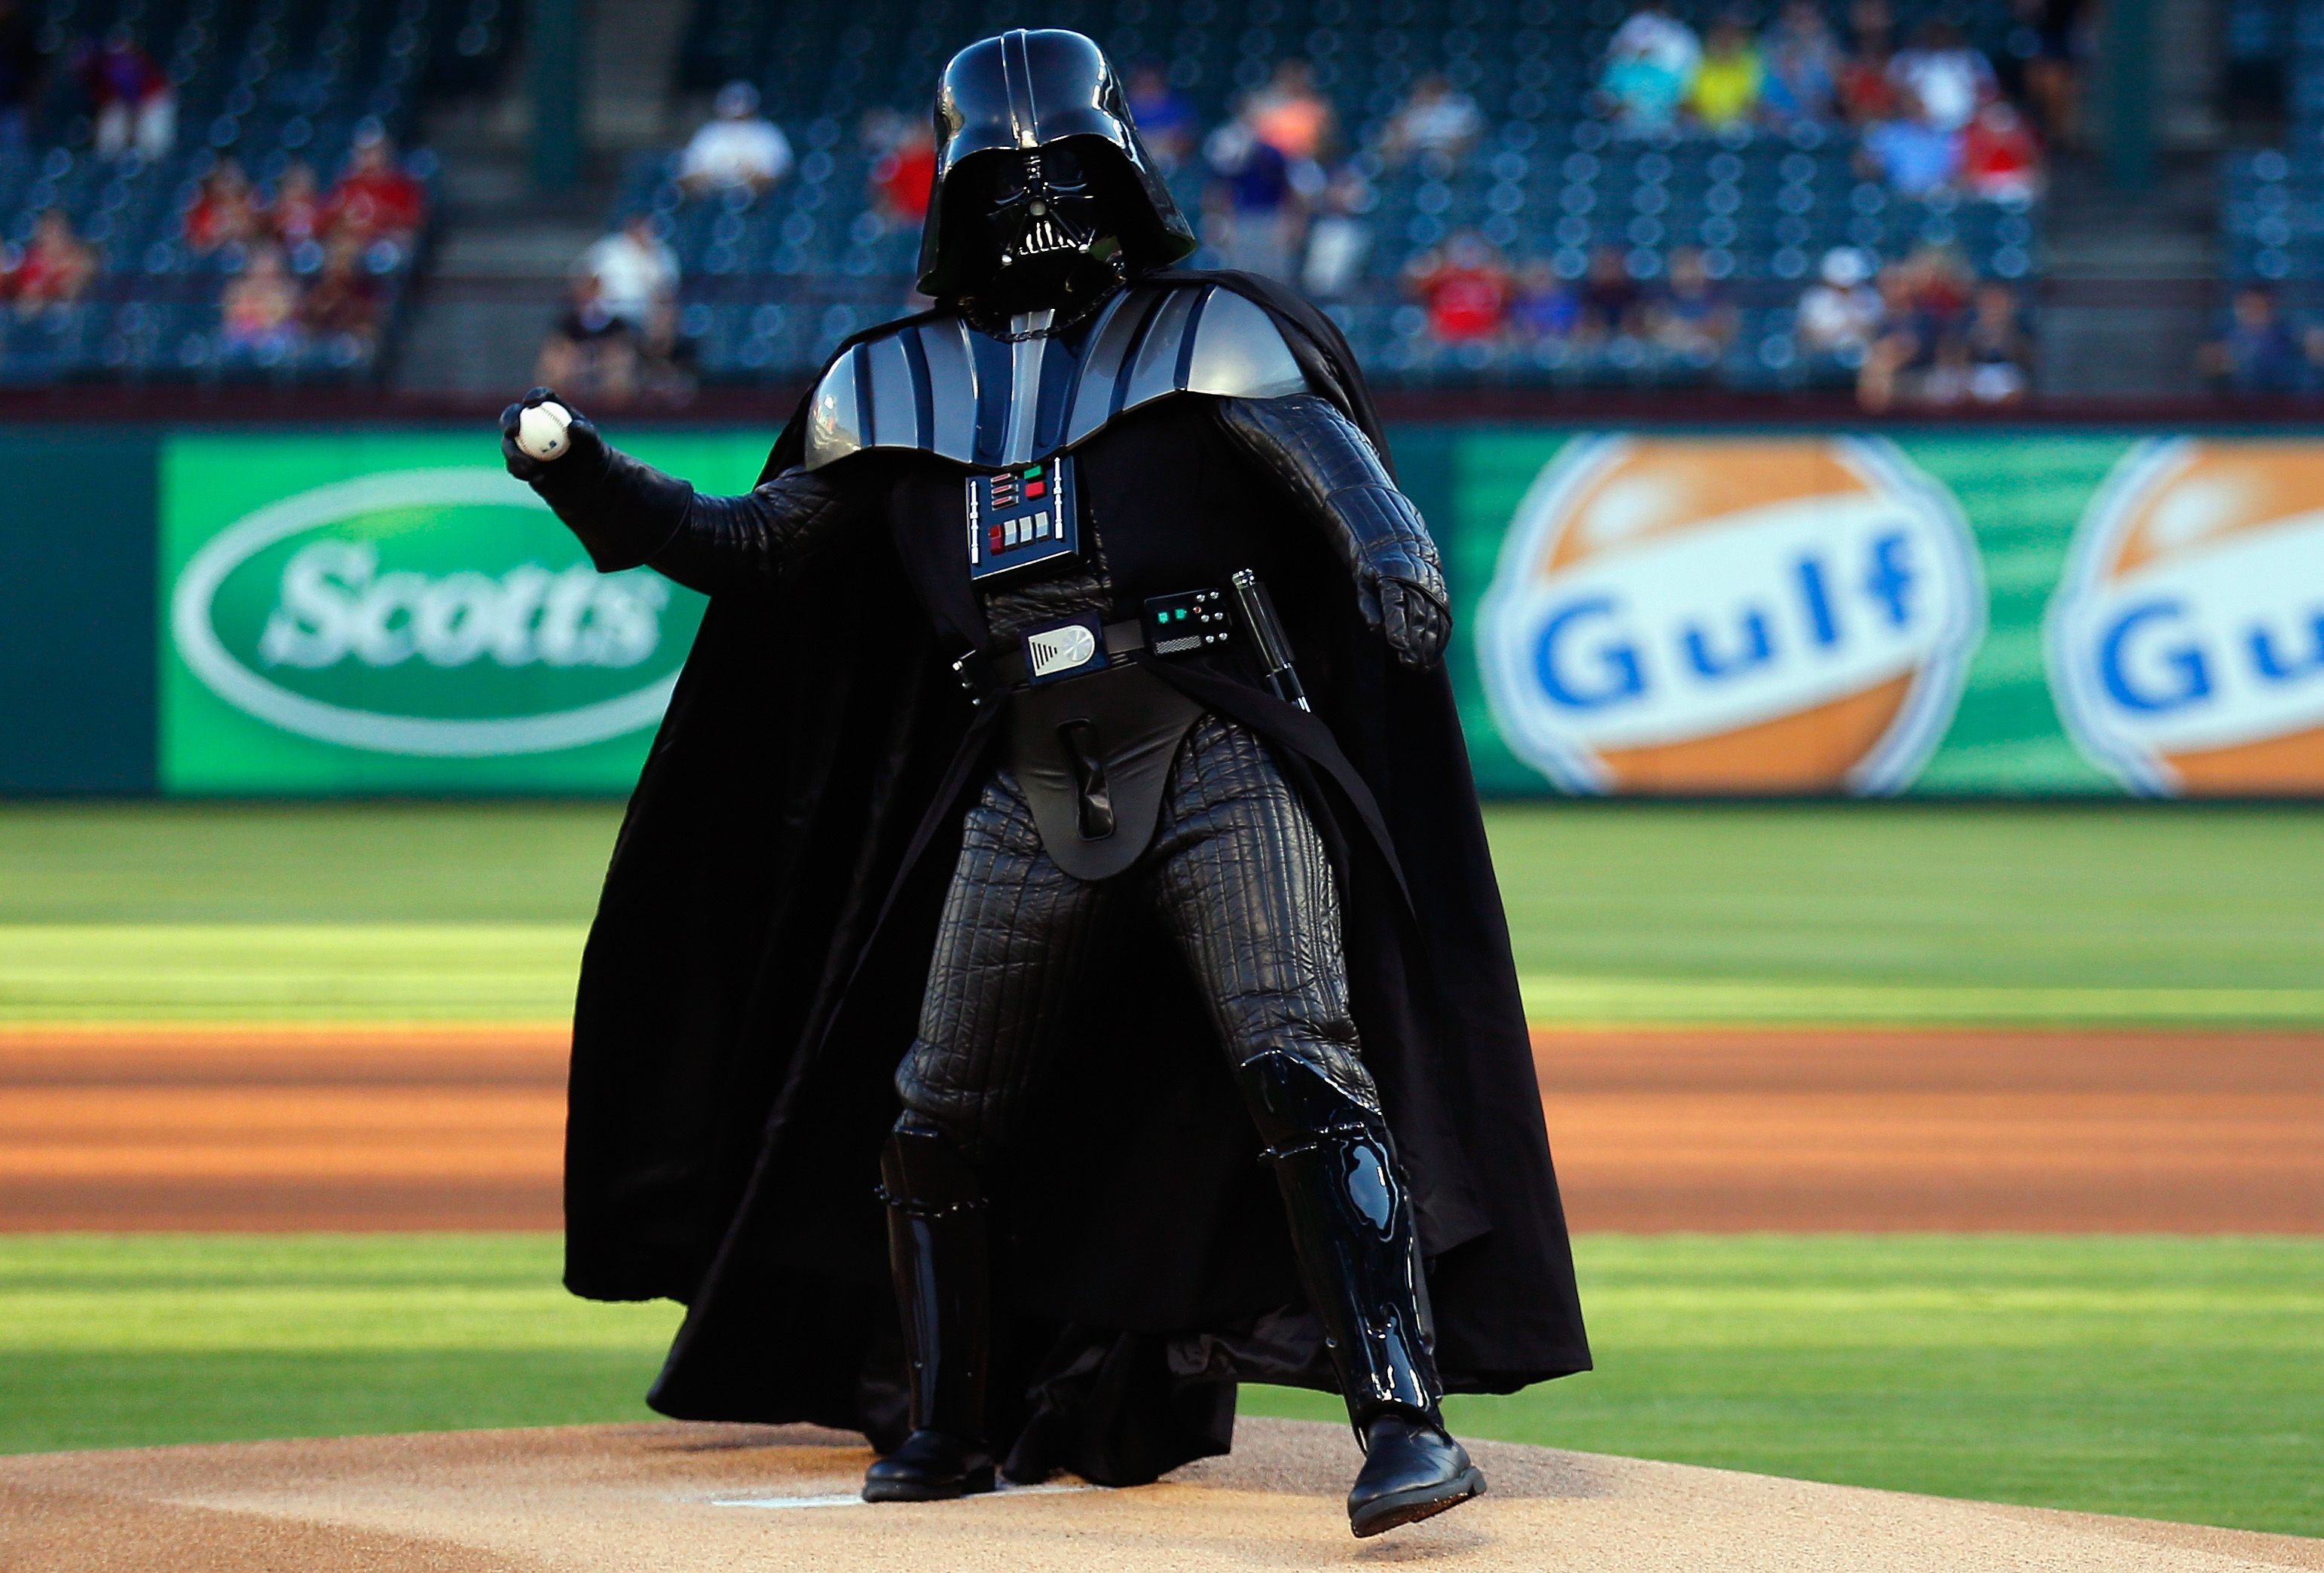 Darth Vader throws out the first pitch